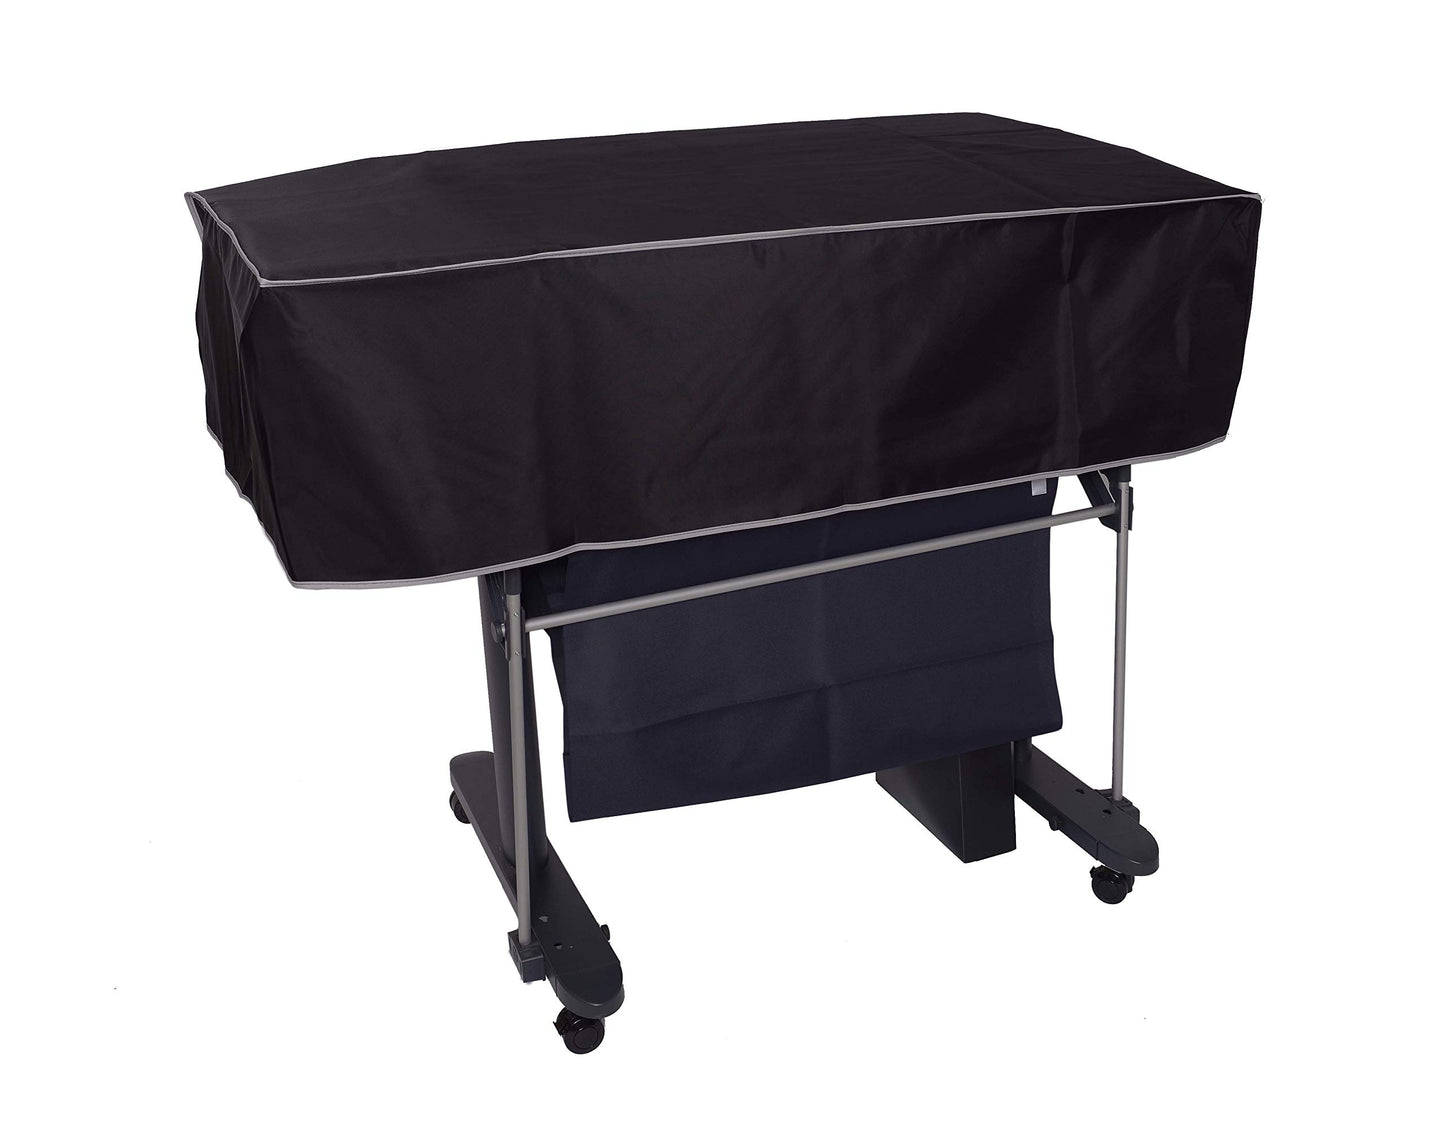 The Perfect Dust Cover, Black Nylon SHORT Cover Compatible with HP DesignJet SD Pro 44'' Scanner, Anti Static and Waterproof Dust Cover Dimensions 60''W x 37''D x 15''H by The Perfect Dust Cover LLC